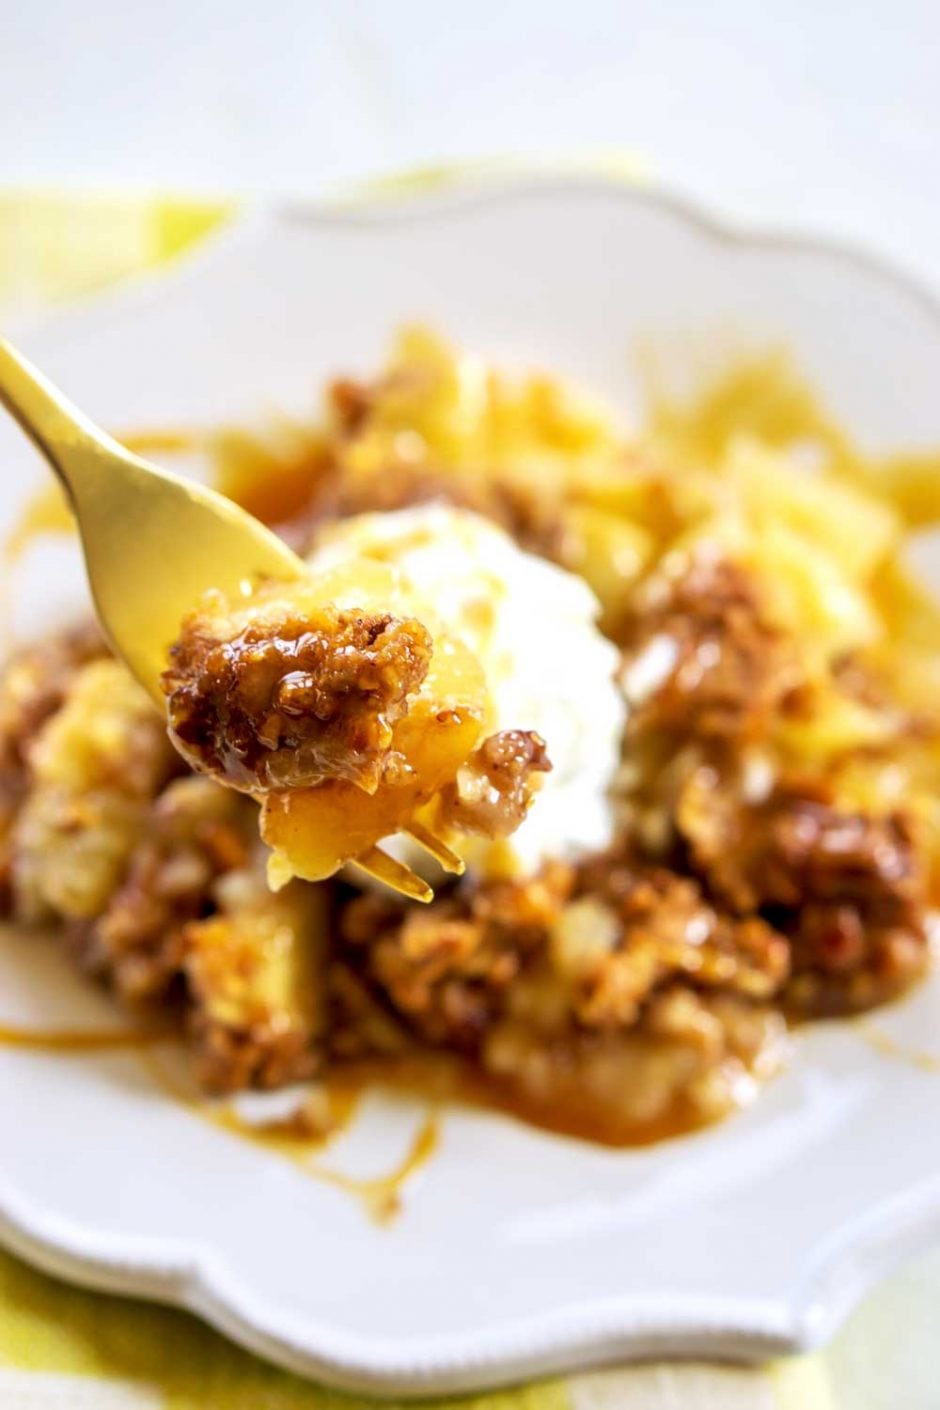 Take a bite of this delicious, buttery apple crisp recipe!